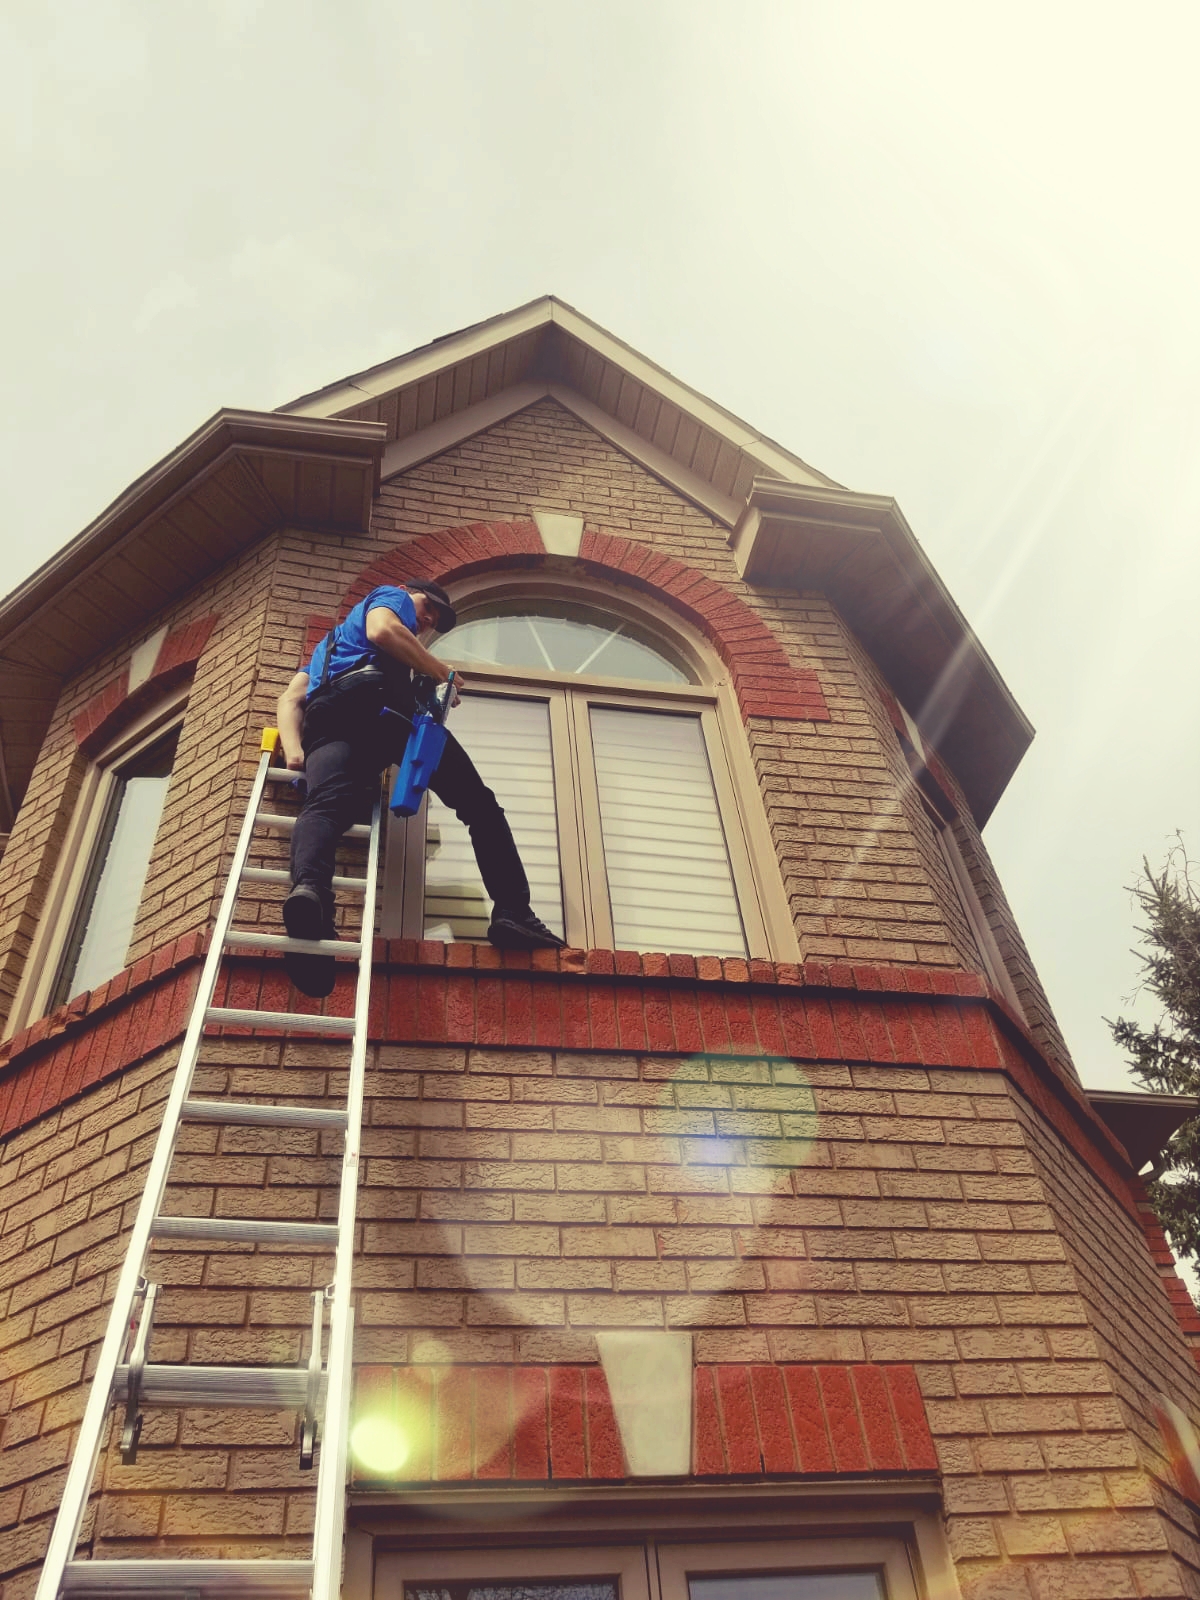 Professional window cleaner on a ladder, cleaning the upper windows of a residential home